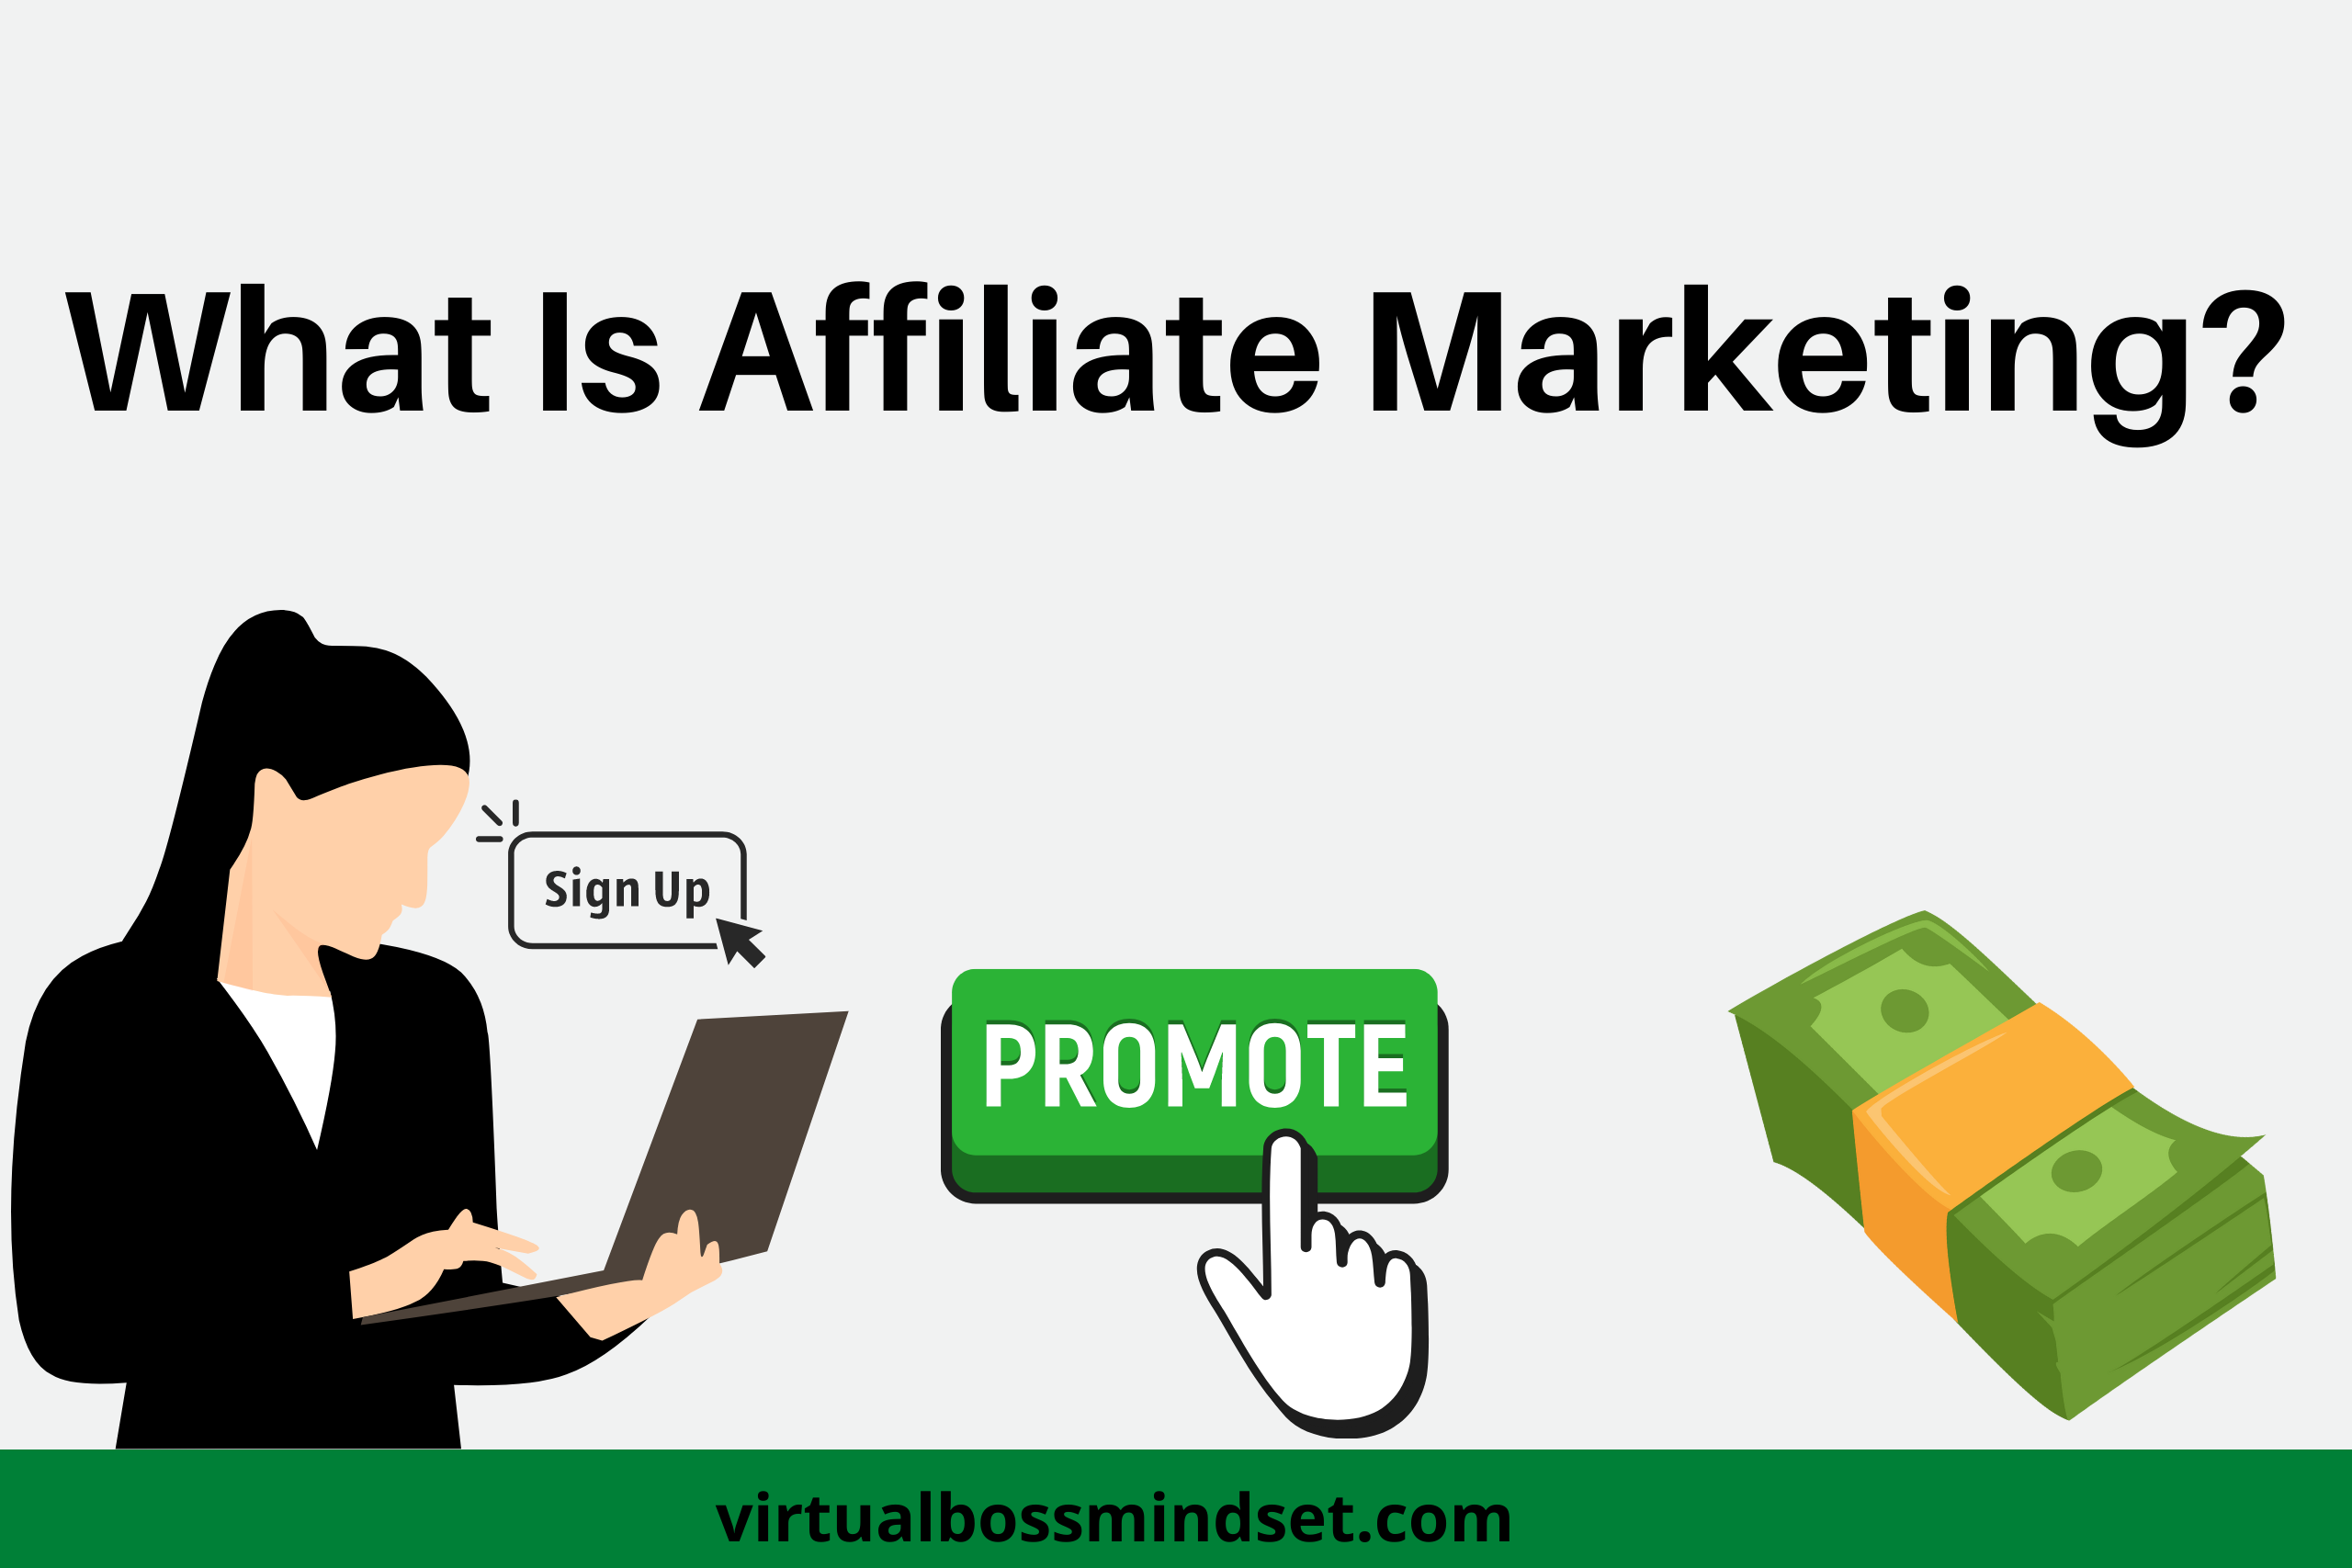 How Much Can You Make as an Affiliate Marketer?